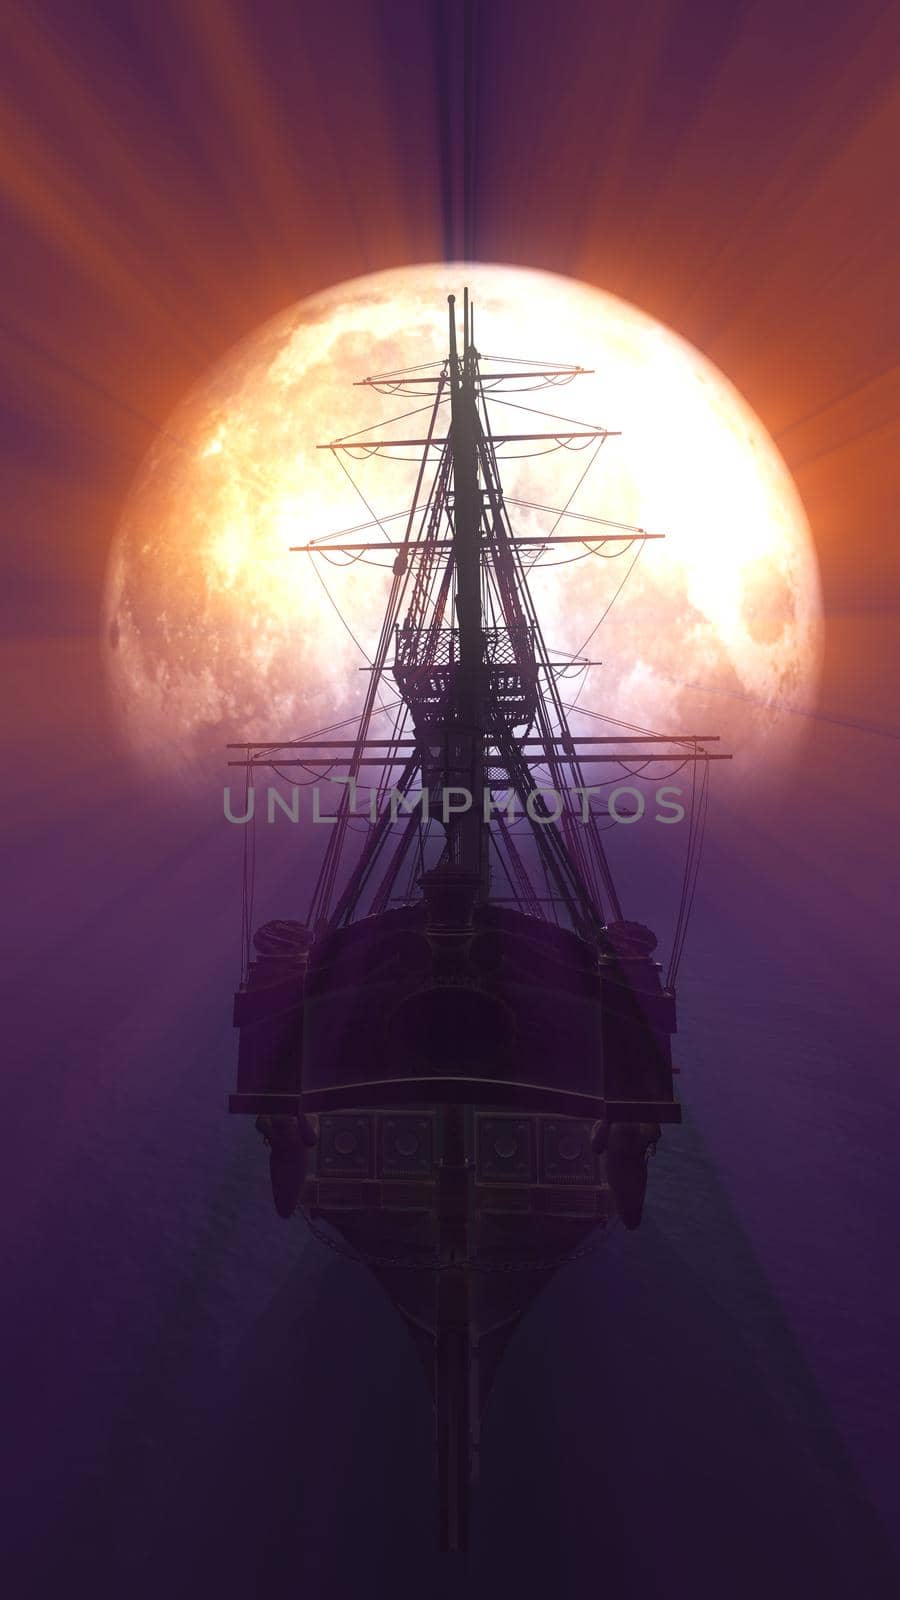 old ship in sea full moon illustration by alex_nako